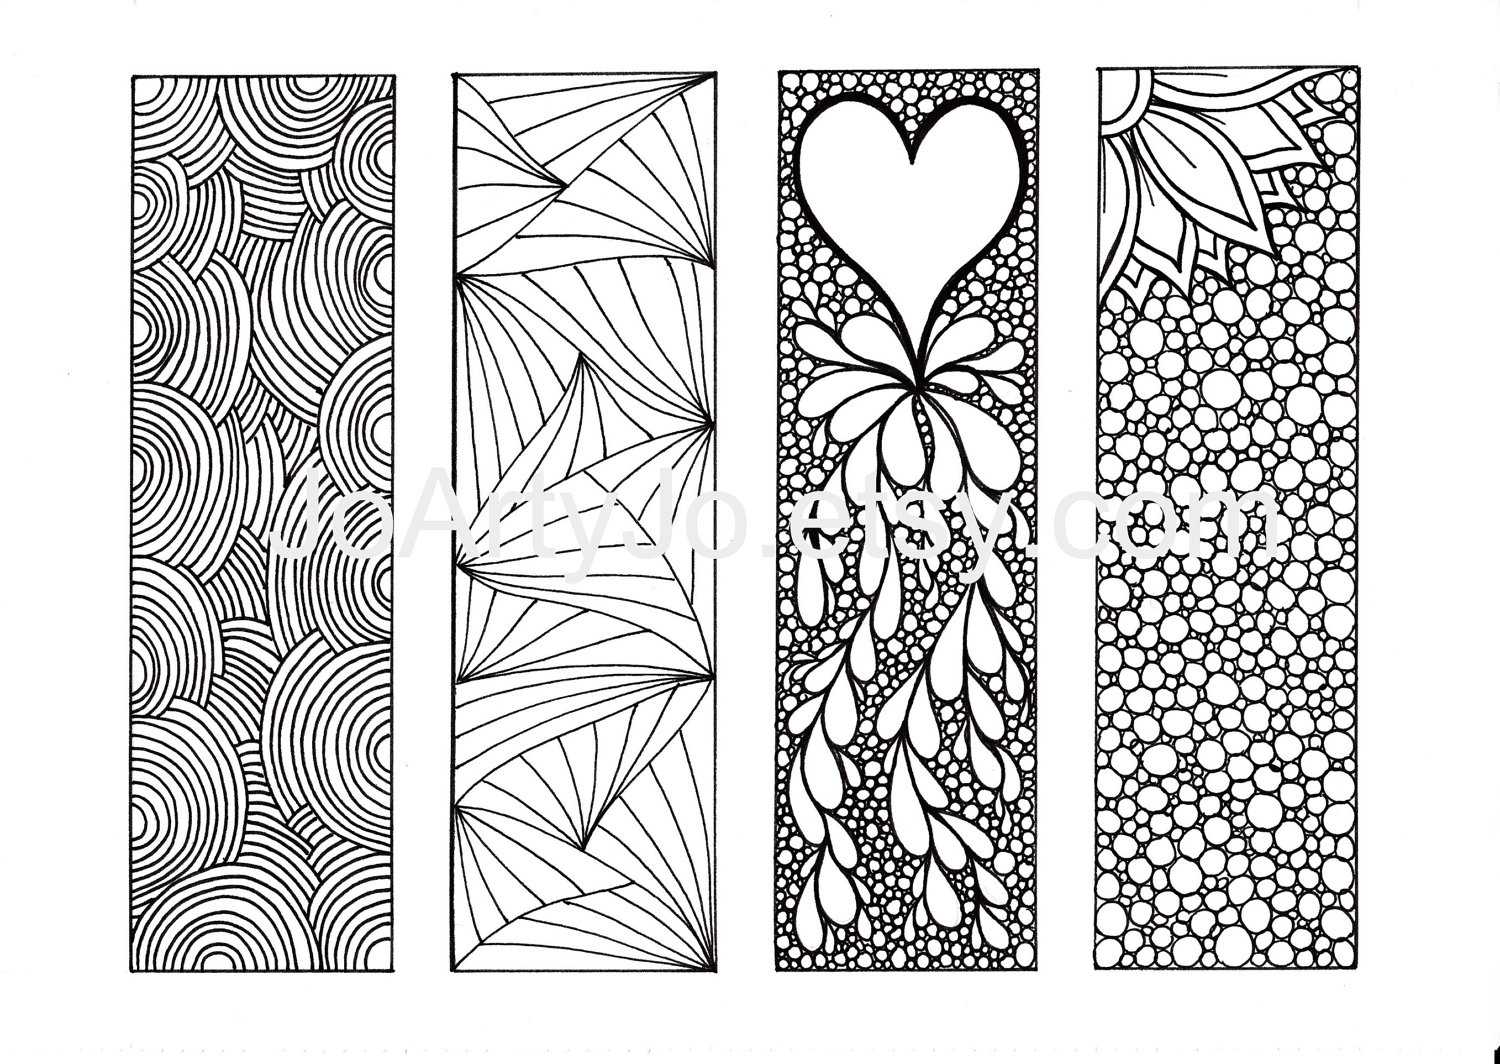 Coloring Pages : Coloring Pages Free Bookmarks To Color For Inside Free Blank Bookmark Templates To Print